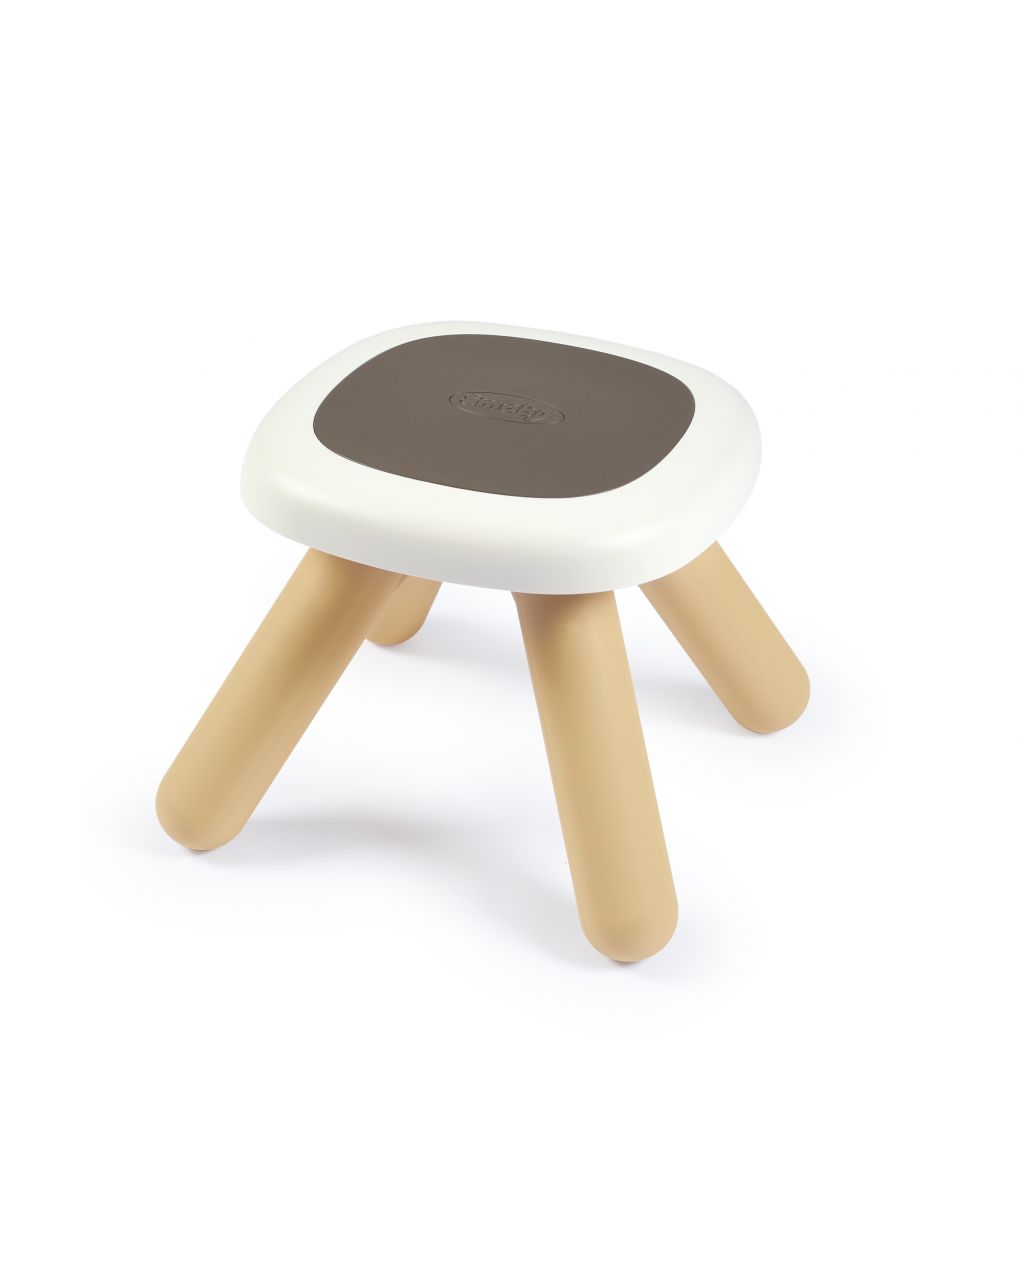 Sgabello kids furniture - smoby - Smoby